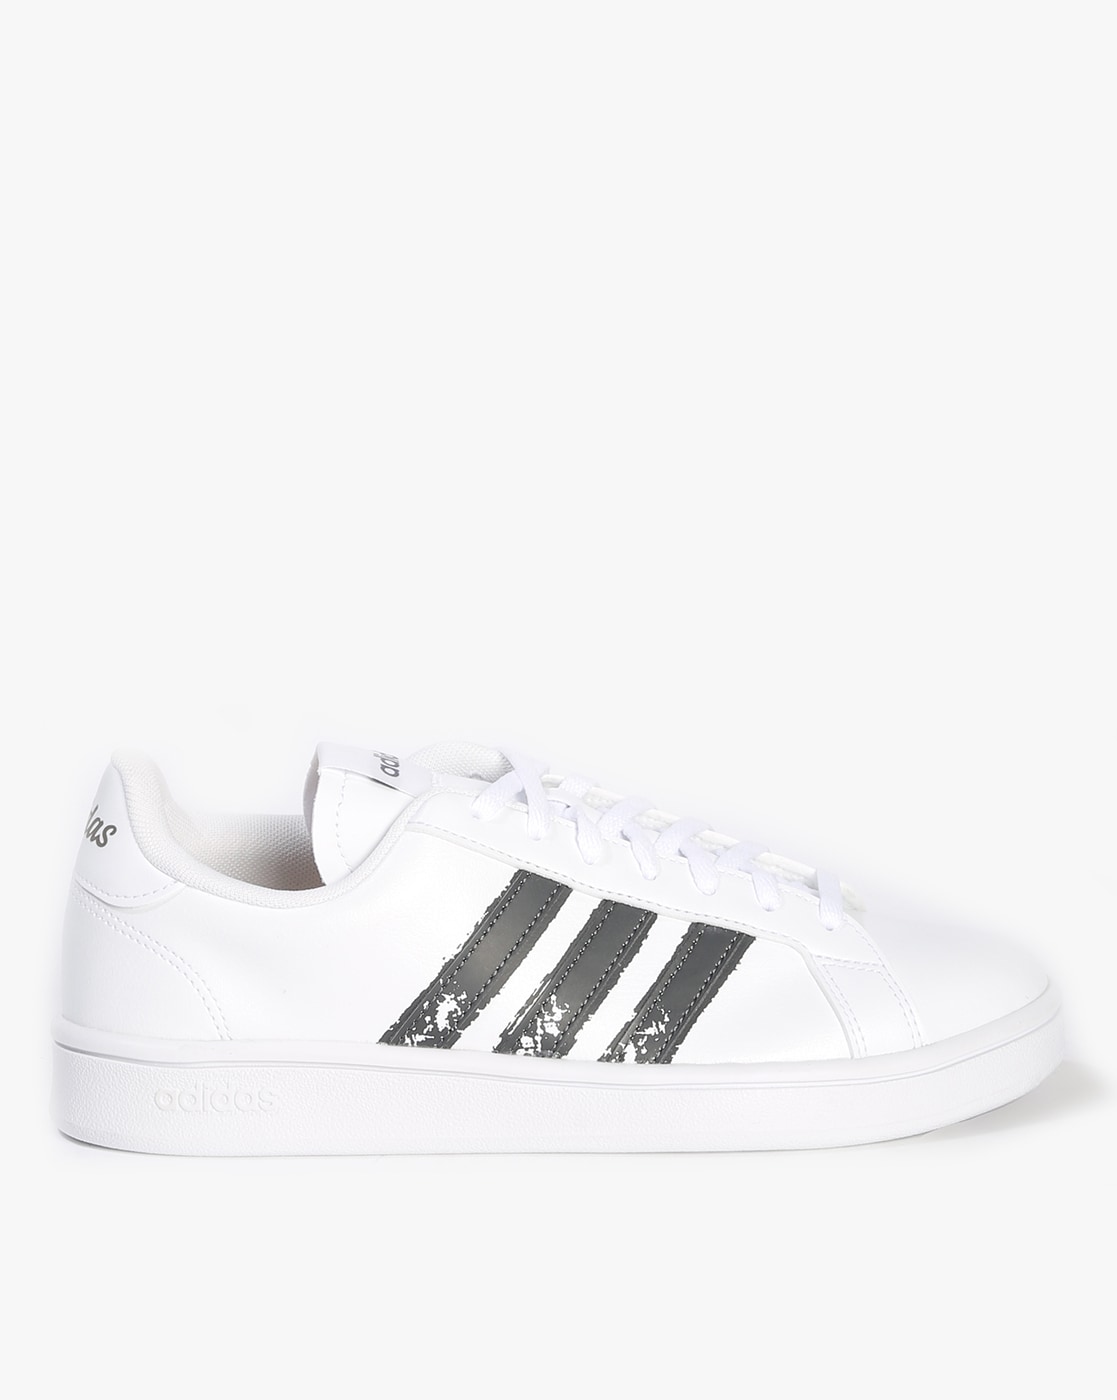 Adidas Grand Court Sneakers Are on Sale for $37 at